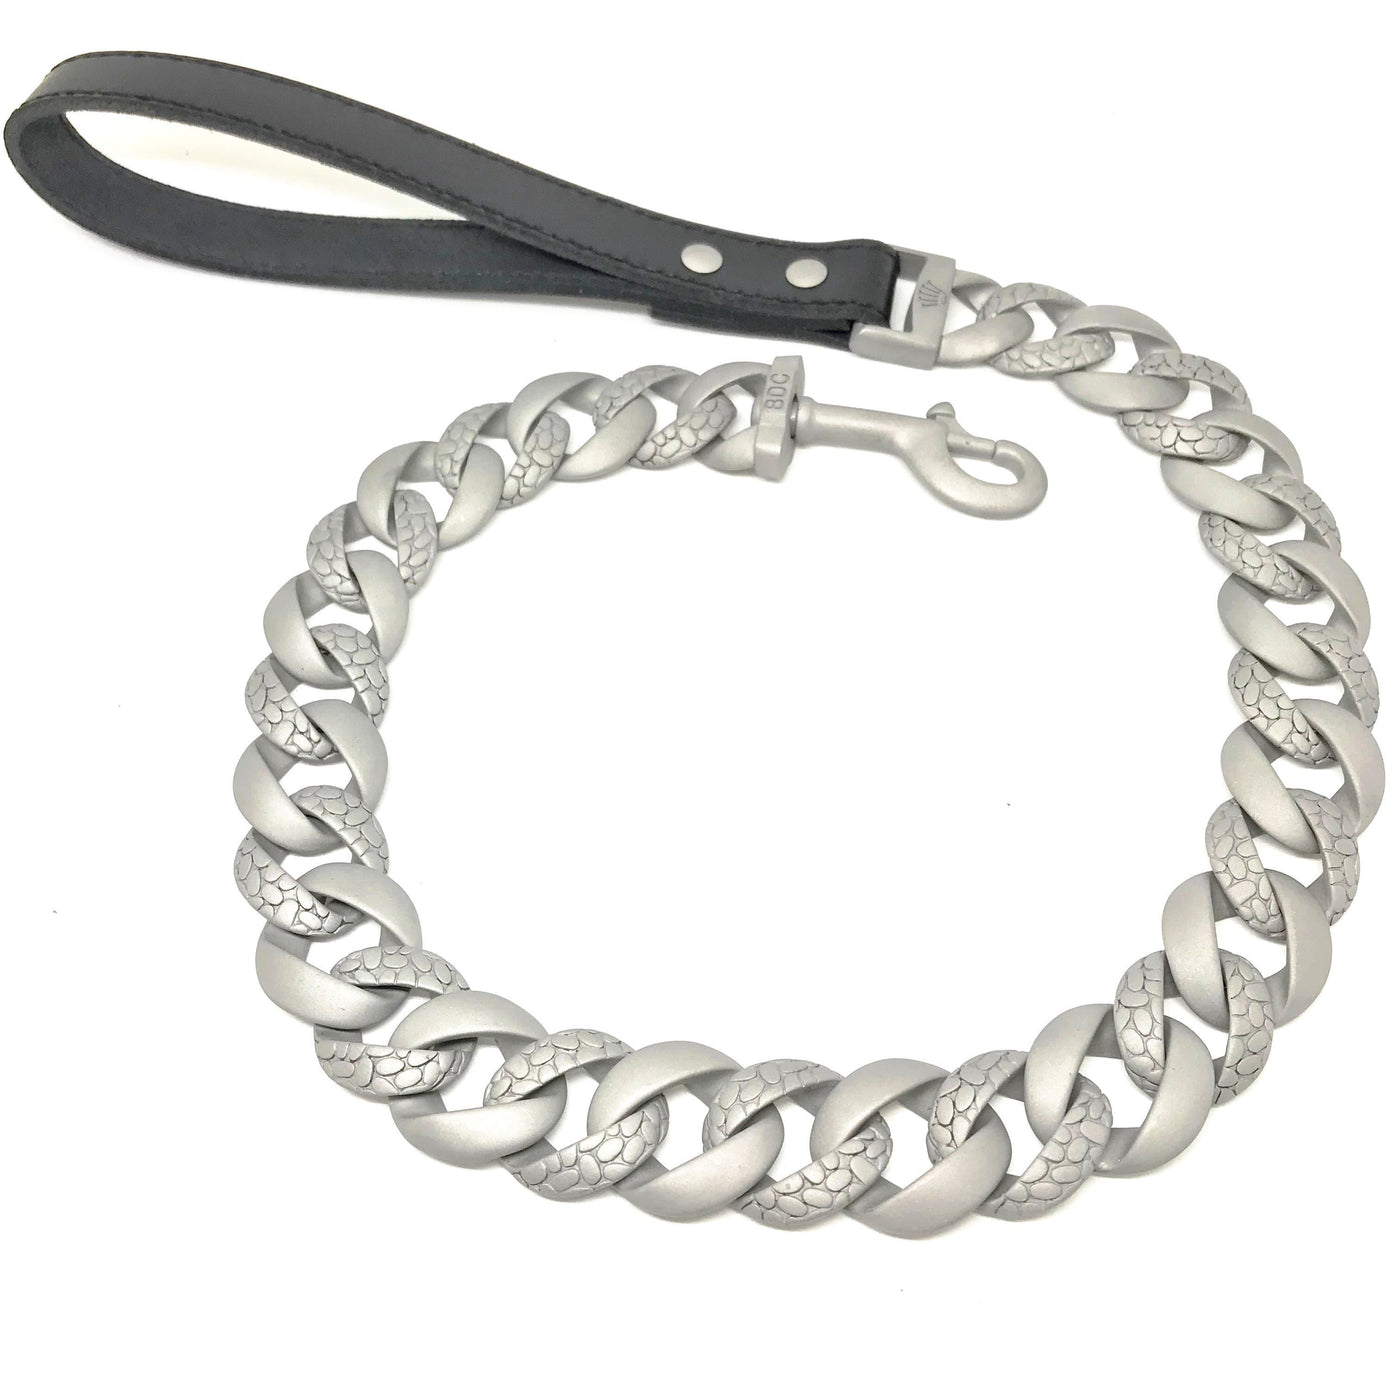 The Bully Leash | MATTE FINISH STAINLESS STEEL DOG LEASH | BIG DOG CHAINS